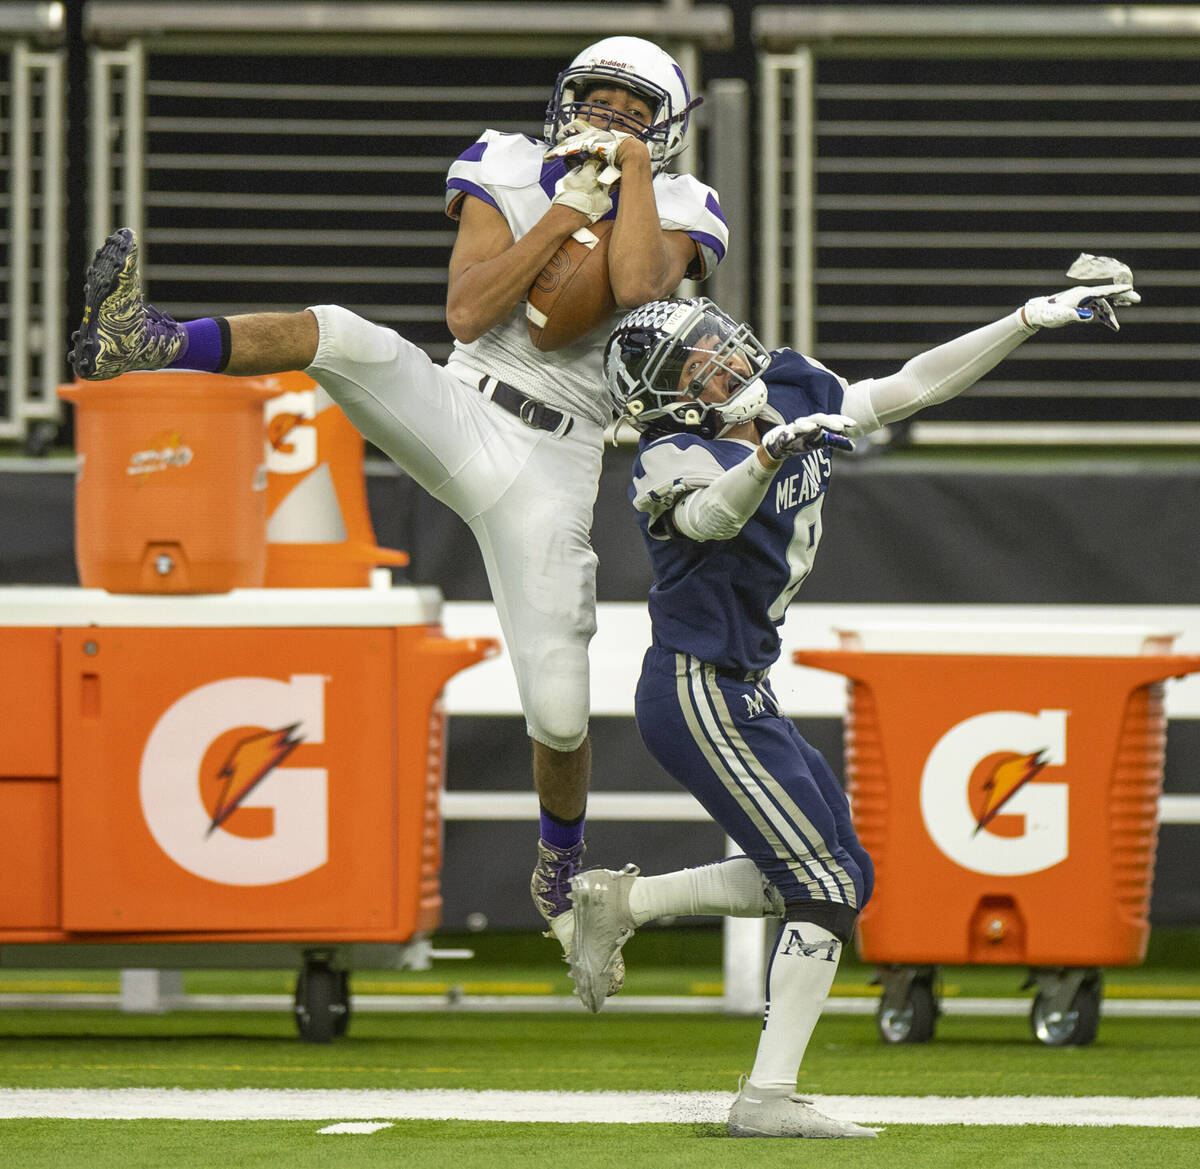 Yerington receiver Donovan Martinez (1) goes up high for a pass attempt over The Meadows defens ...